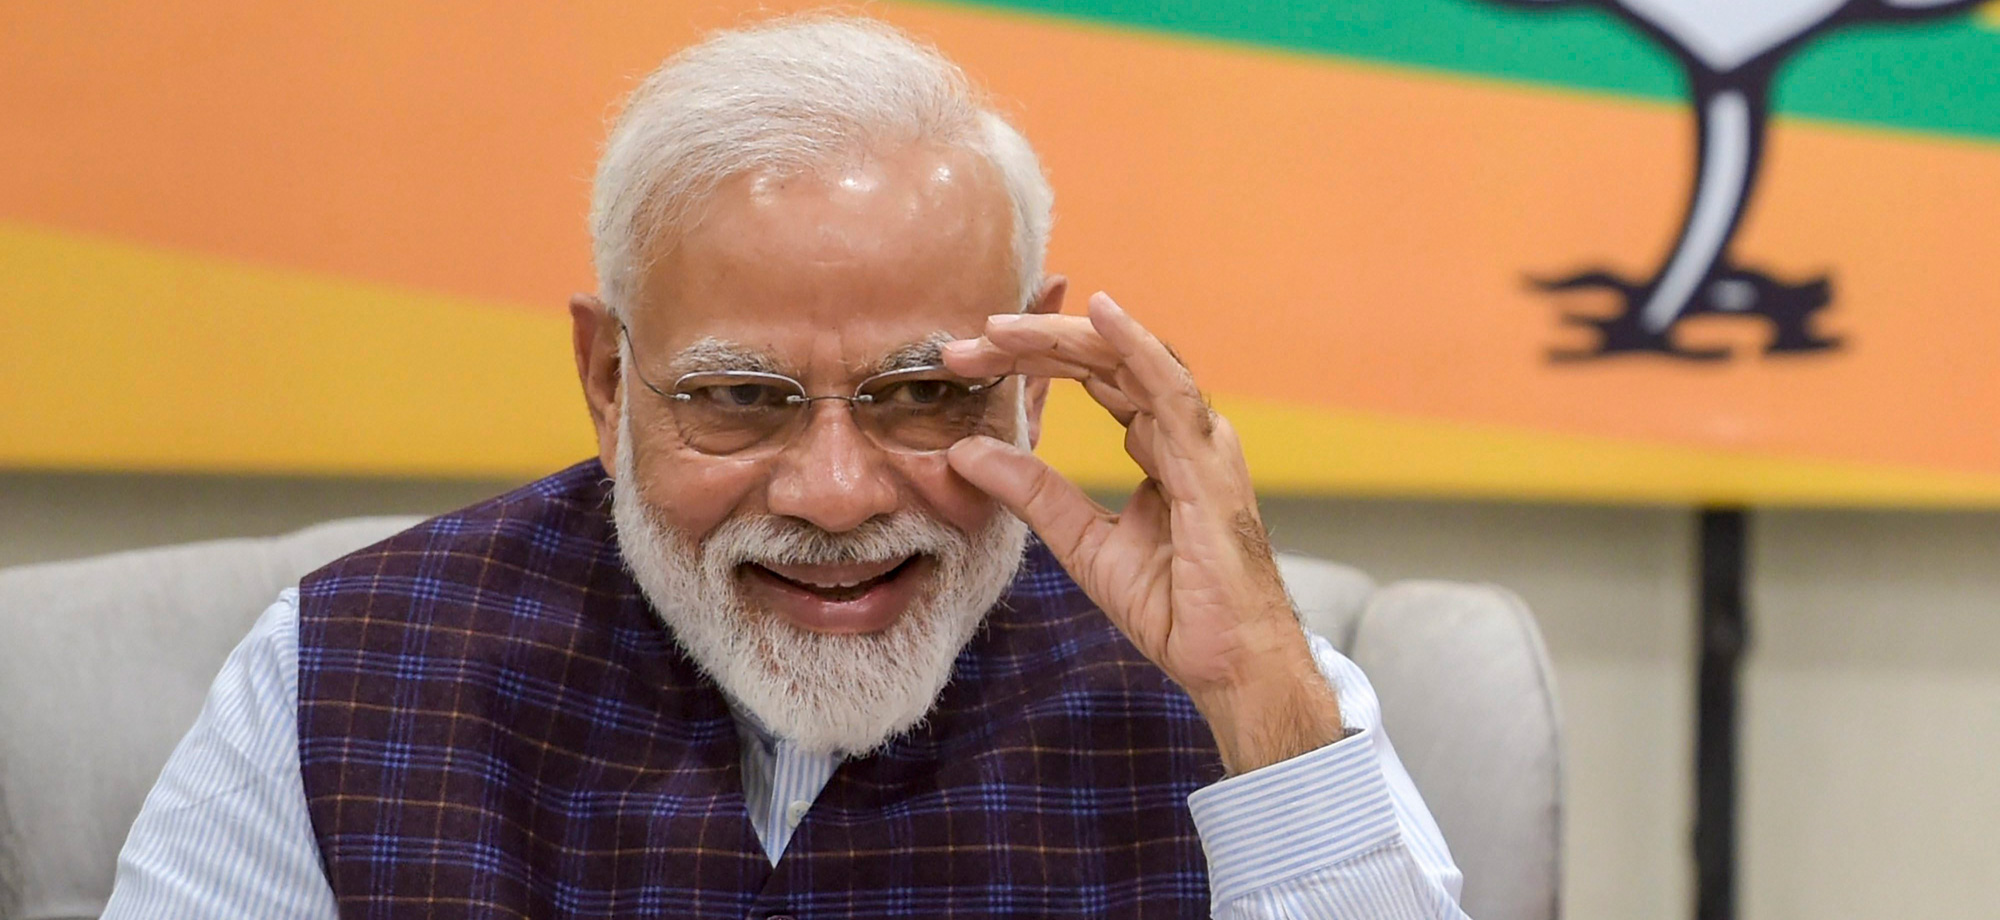 The Narendra Modi-led government has been too frank about dropping the assembly elections in Jammu and Kashmir due at the time of the Lok Sabha polls.